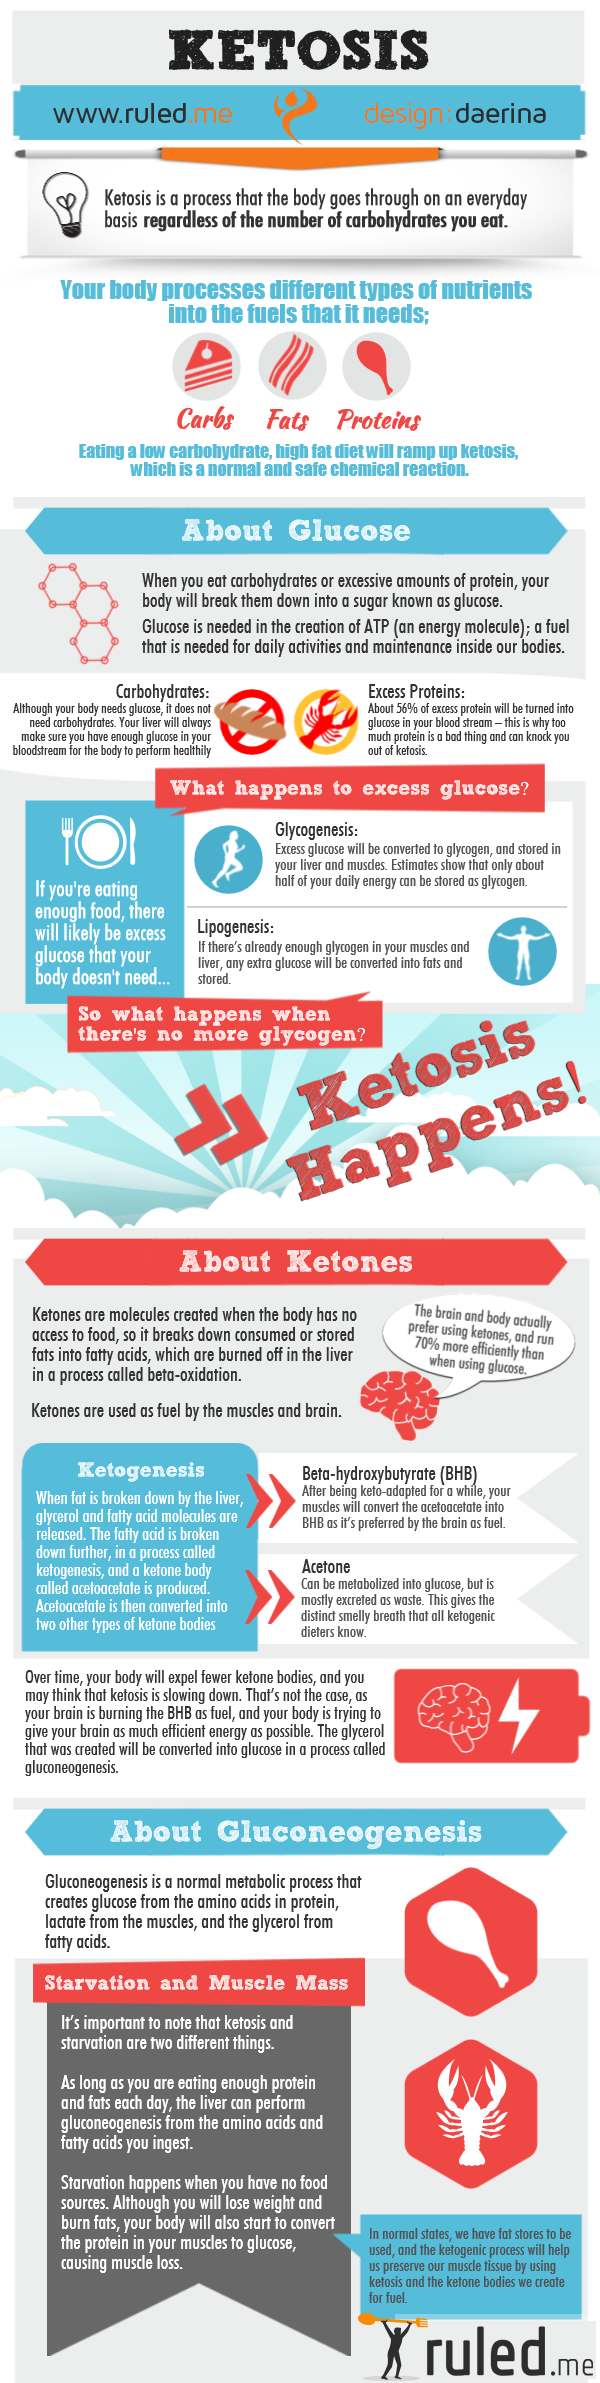 Ketosis, Ketones, and How It All Works